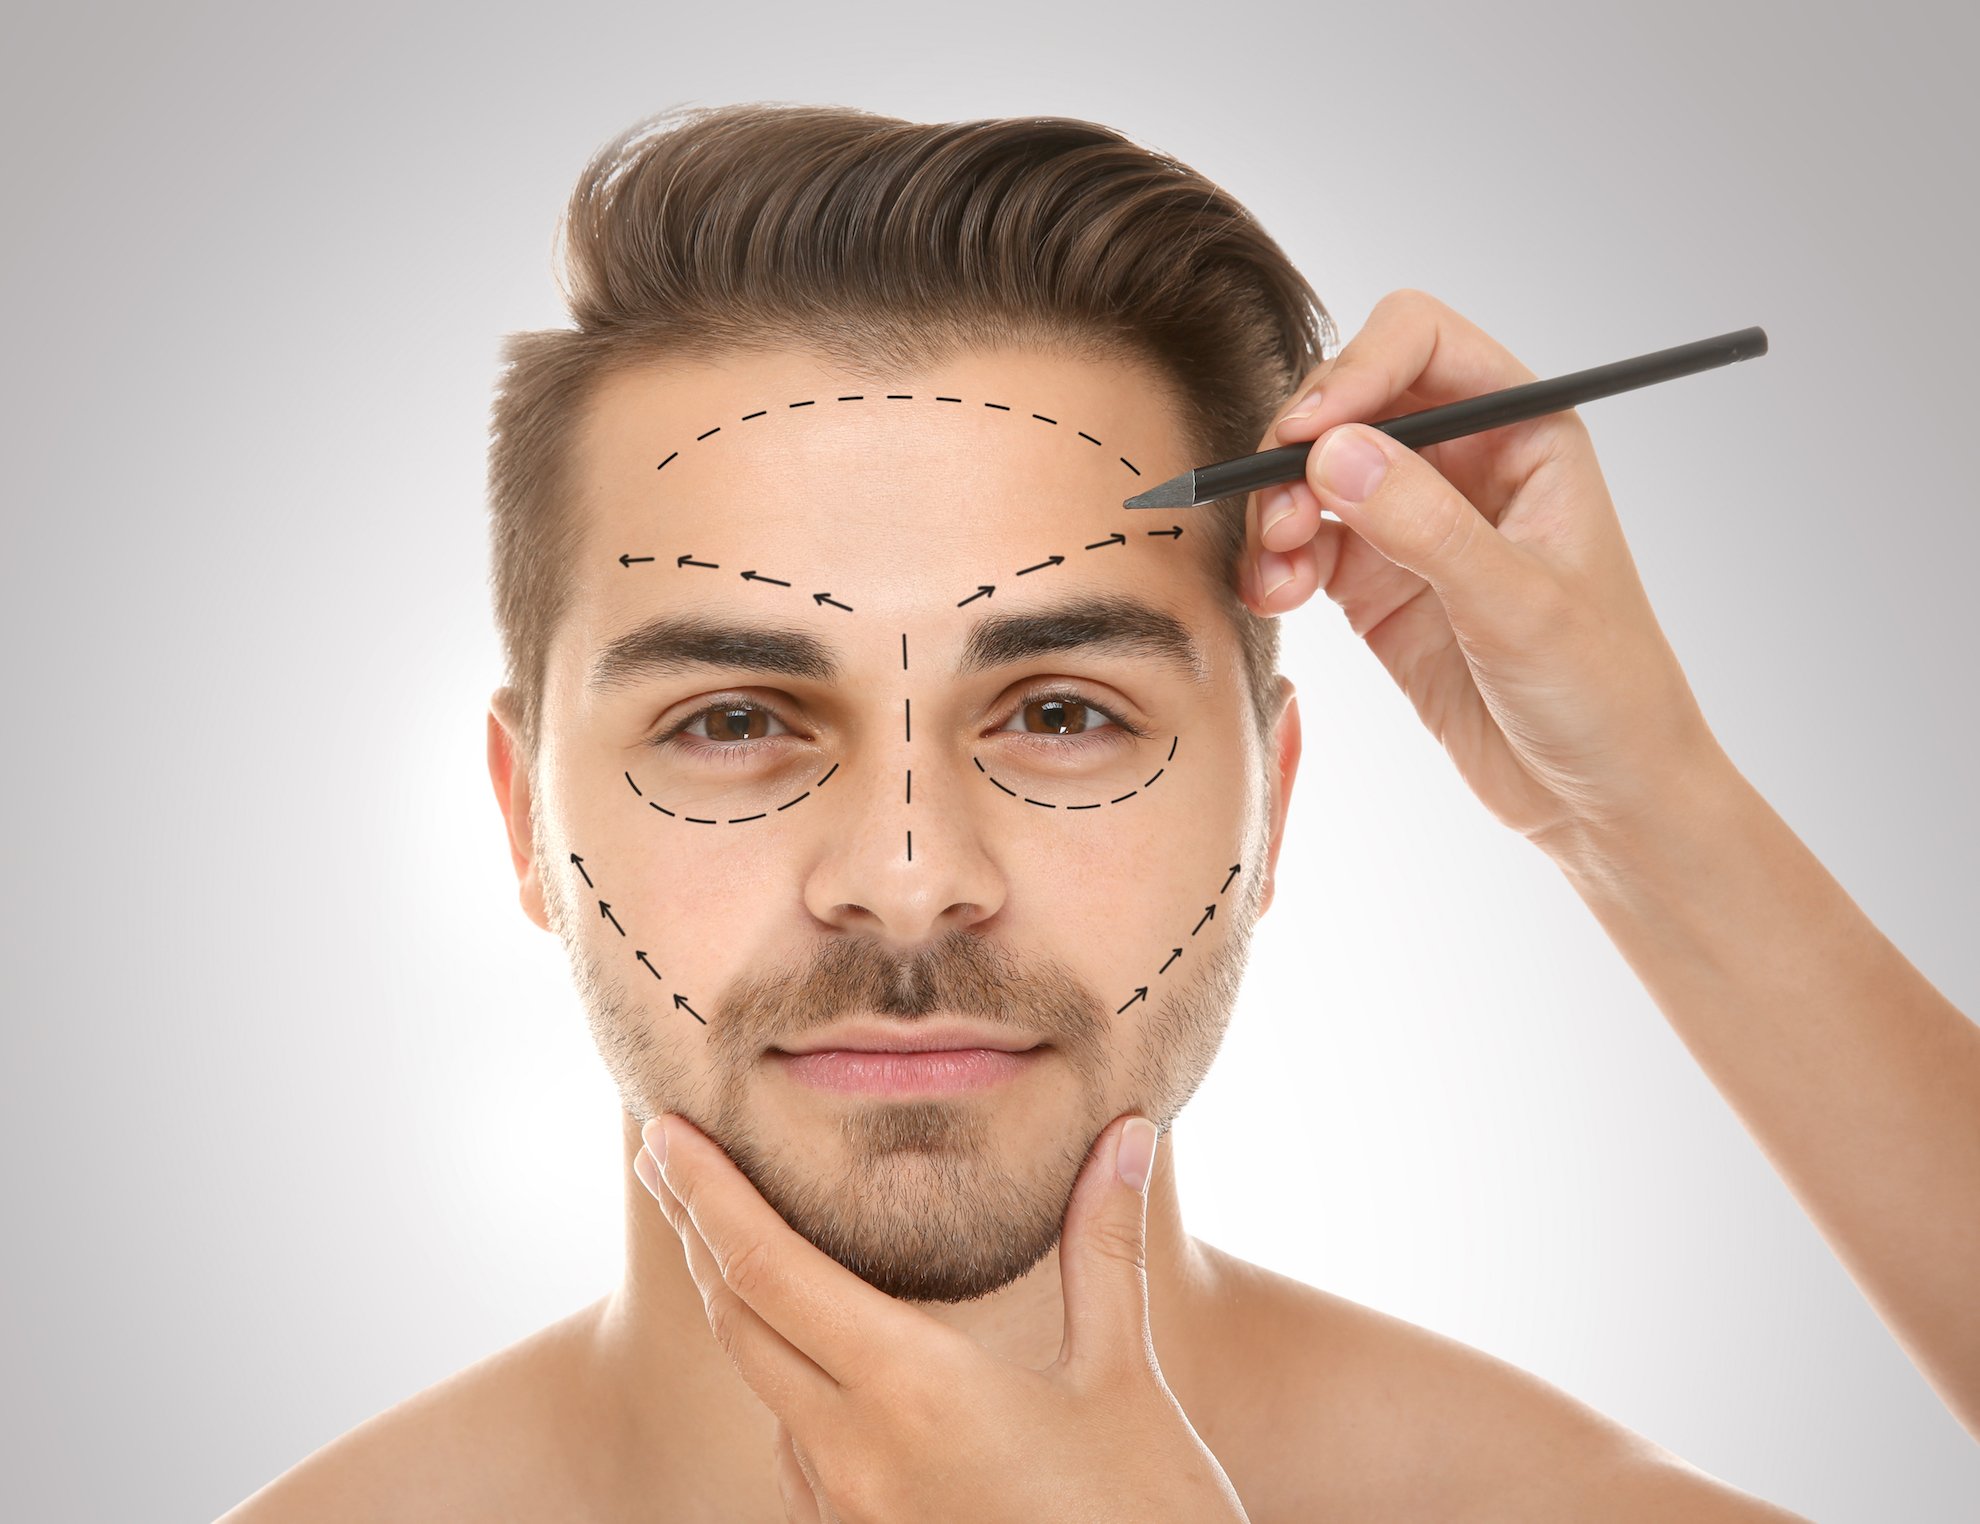 How to Speed up Your Recovery after Facial Plastic Surgery